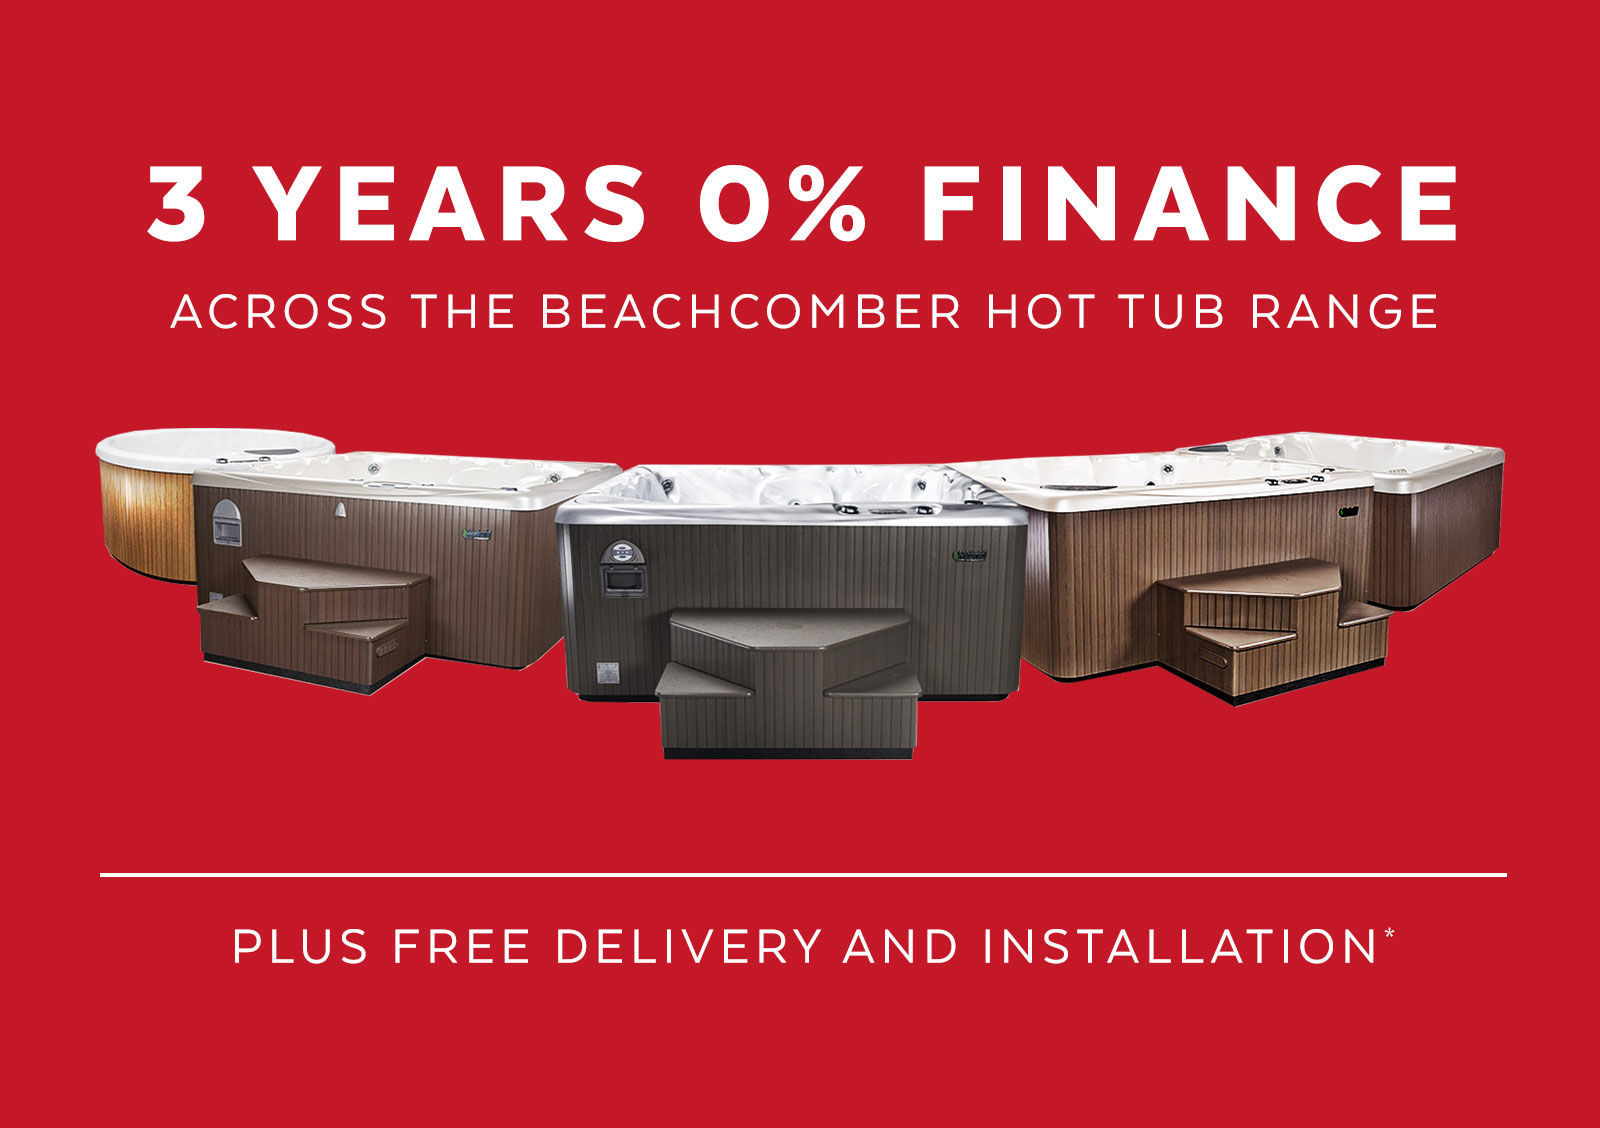 3 Years 0% Finance Plus FREE Delivery & Installation